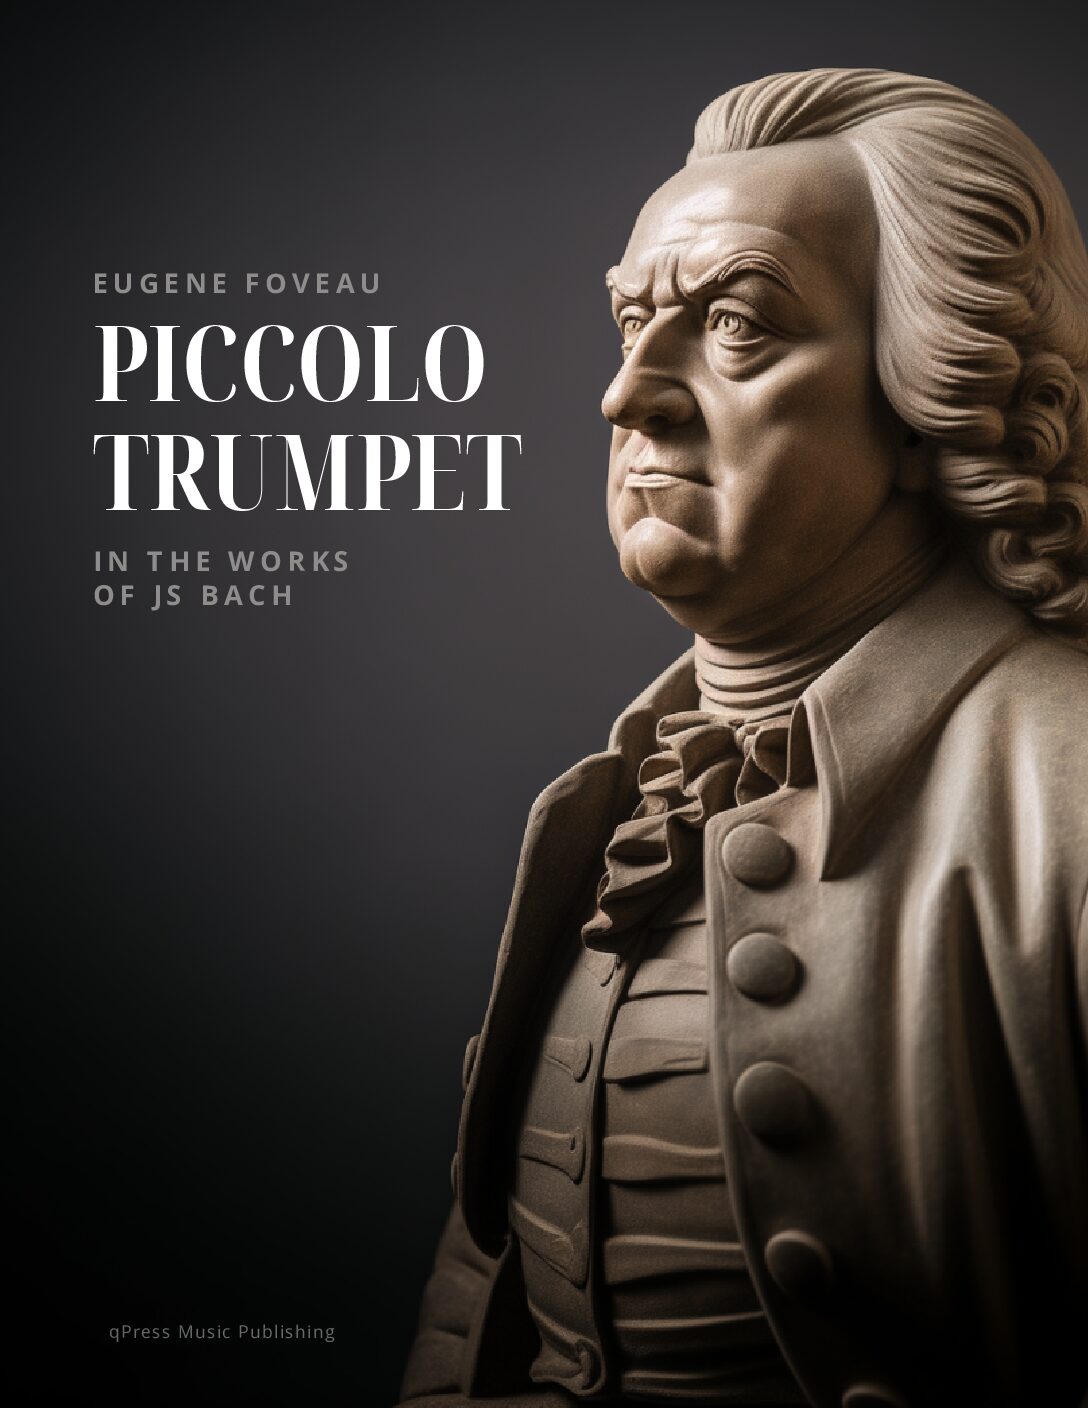 Foveau, Piccolo Trumpet in the works of Bach